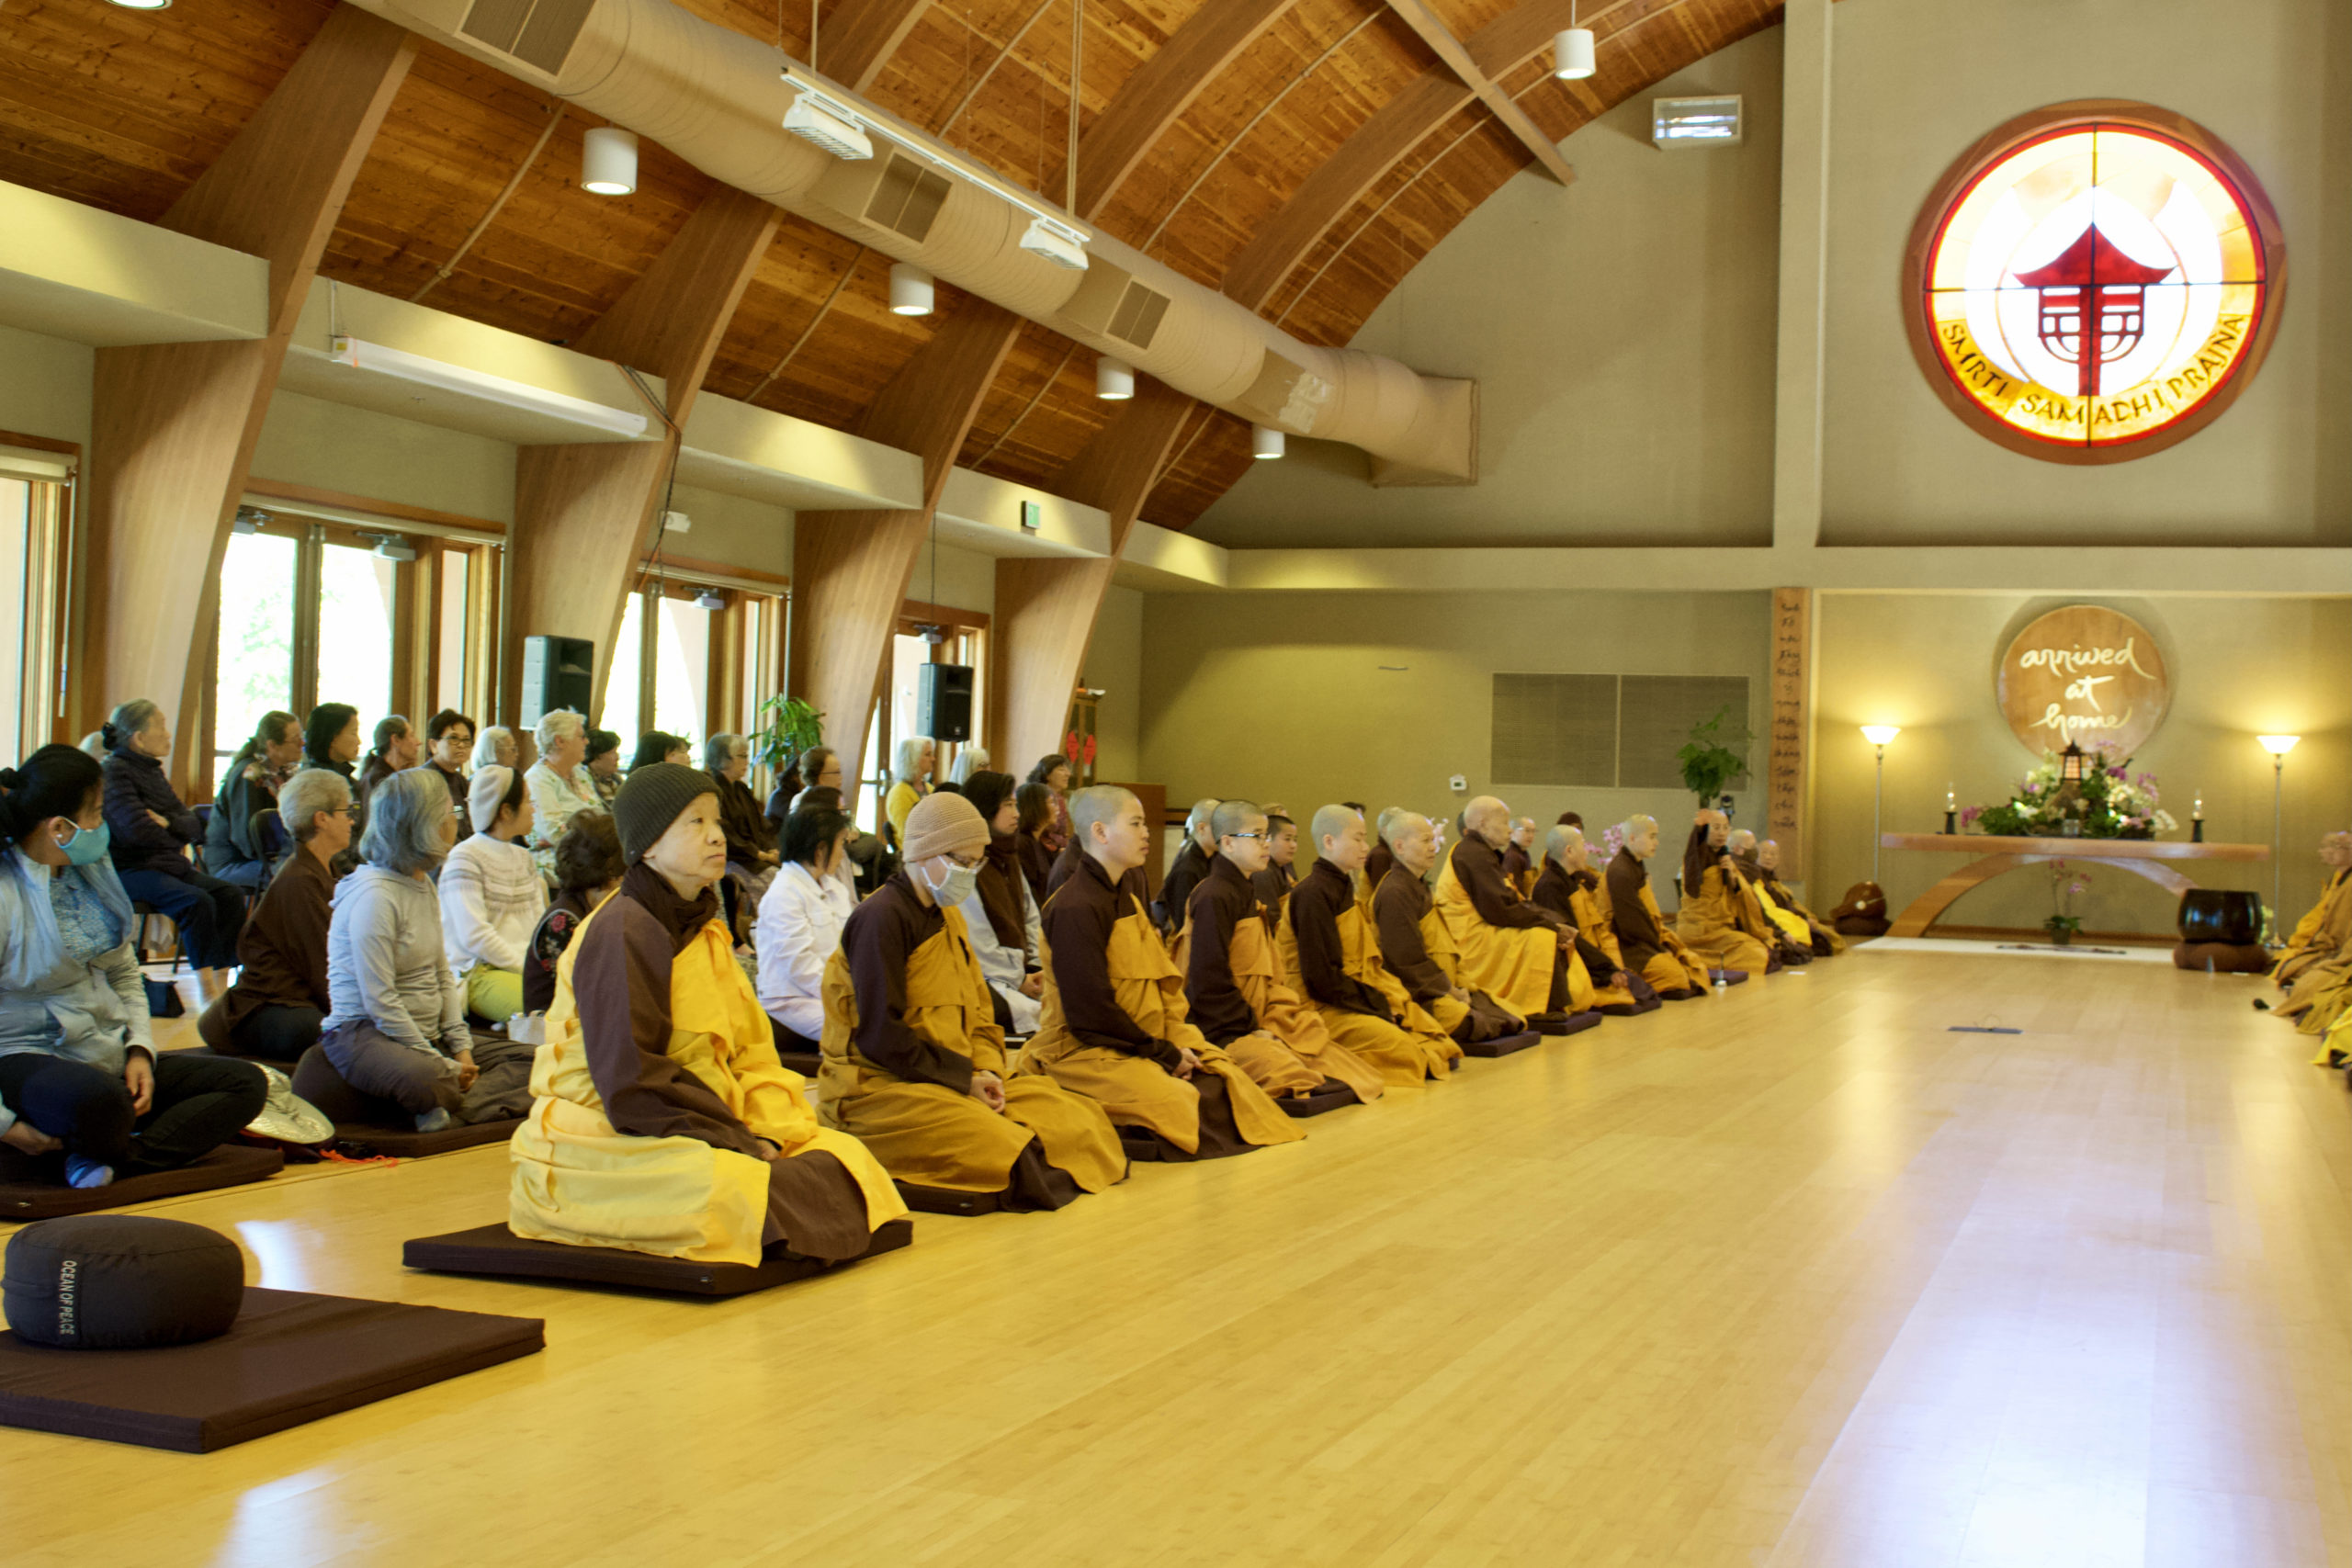 Live Ceremony to Recite the Fourteen Mindfulness Trainings (Online)